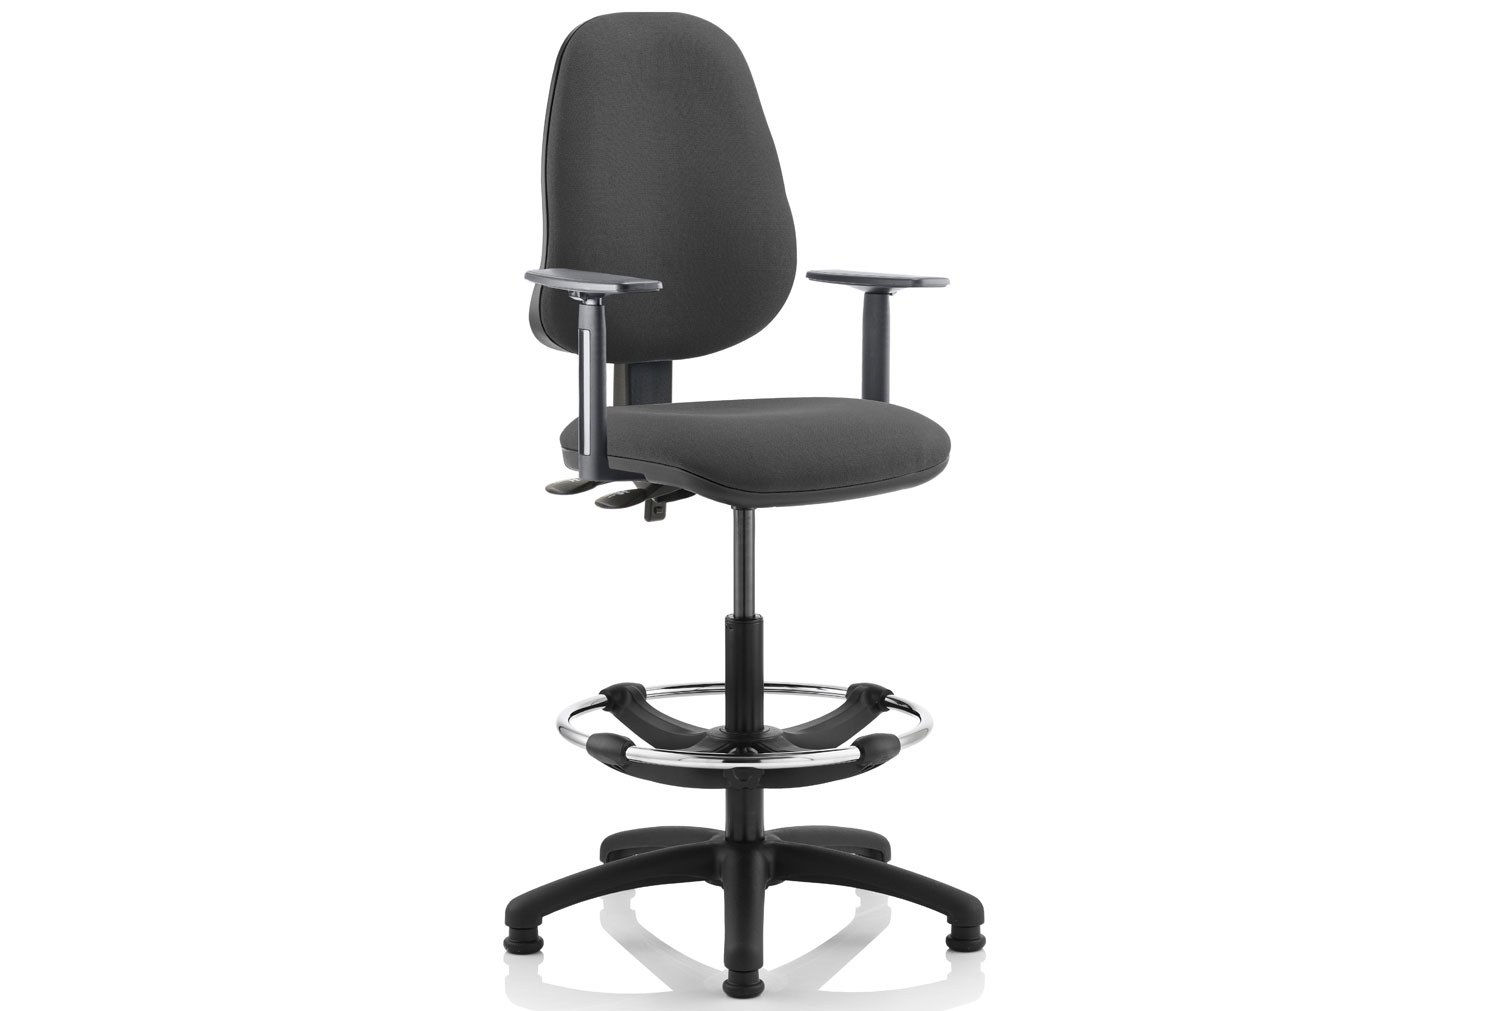 Lunar 2 Lever Draughtsman Office Chair With Adjustable Arms, Charcoal, Express Delivery